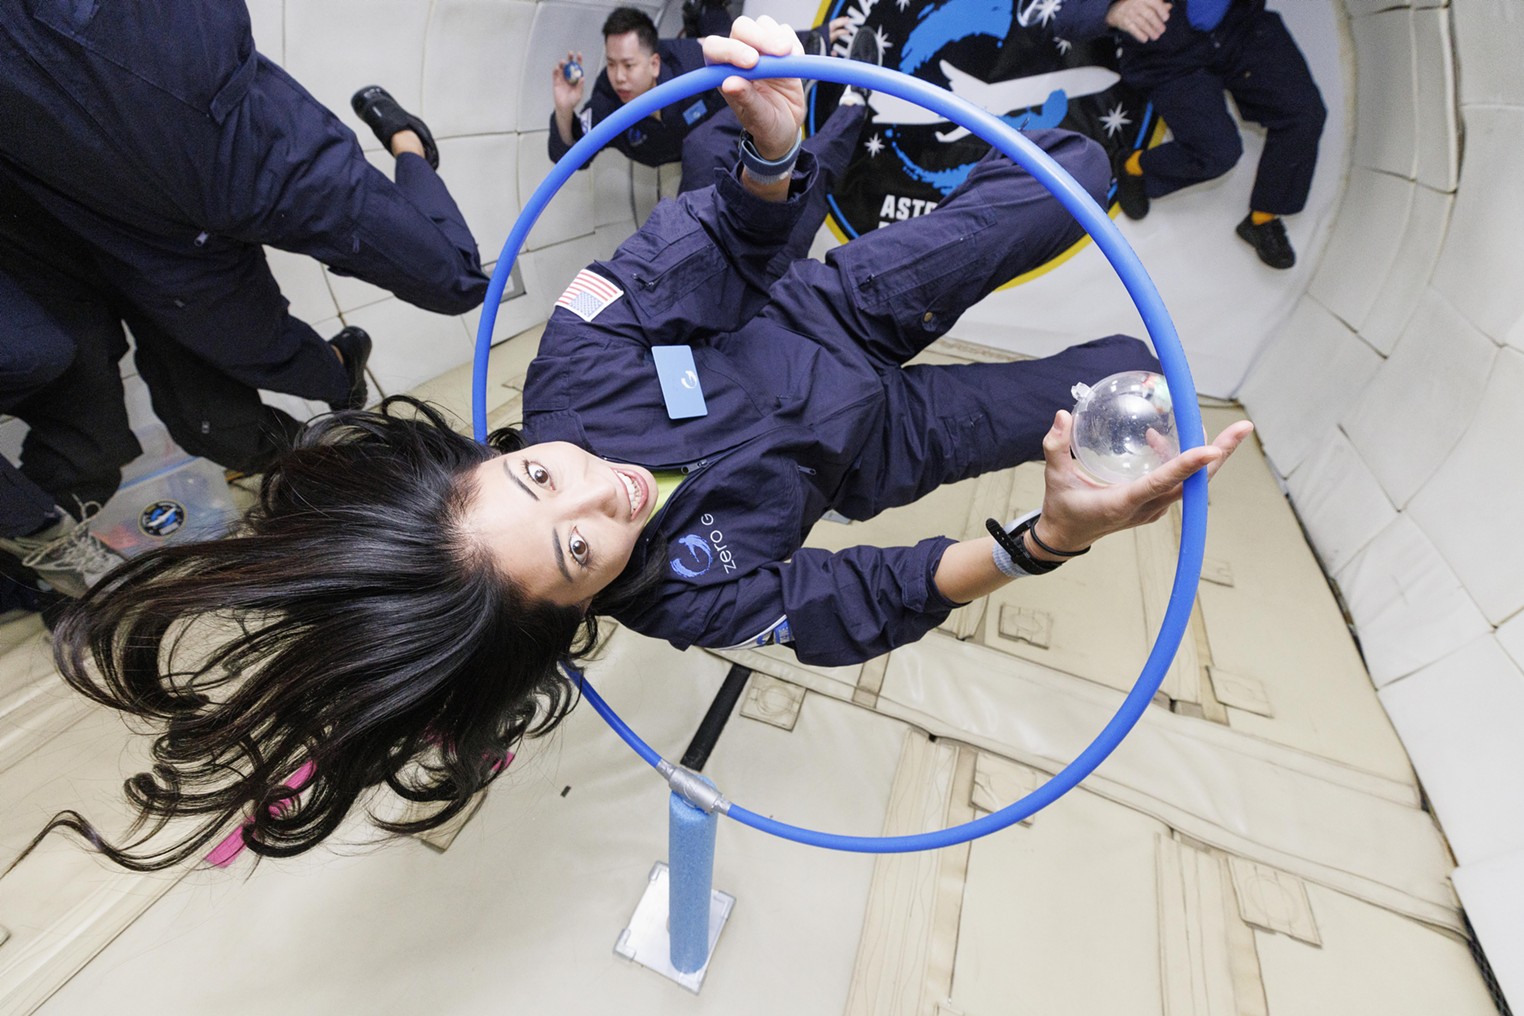 Wanna Feel What It’s Like to Go to Space? The Zero-G Experience Can Make it Happen